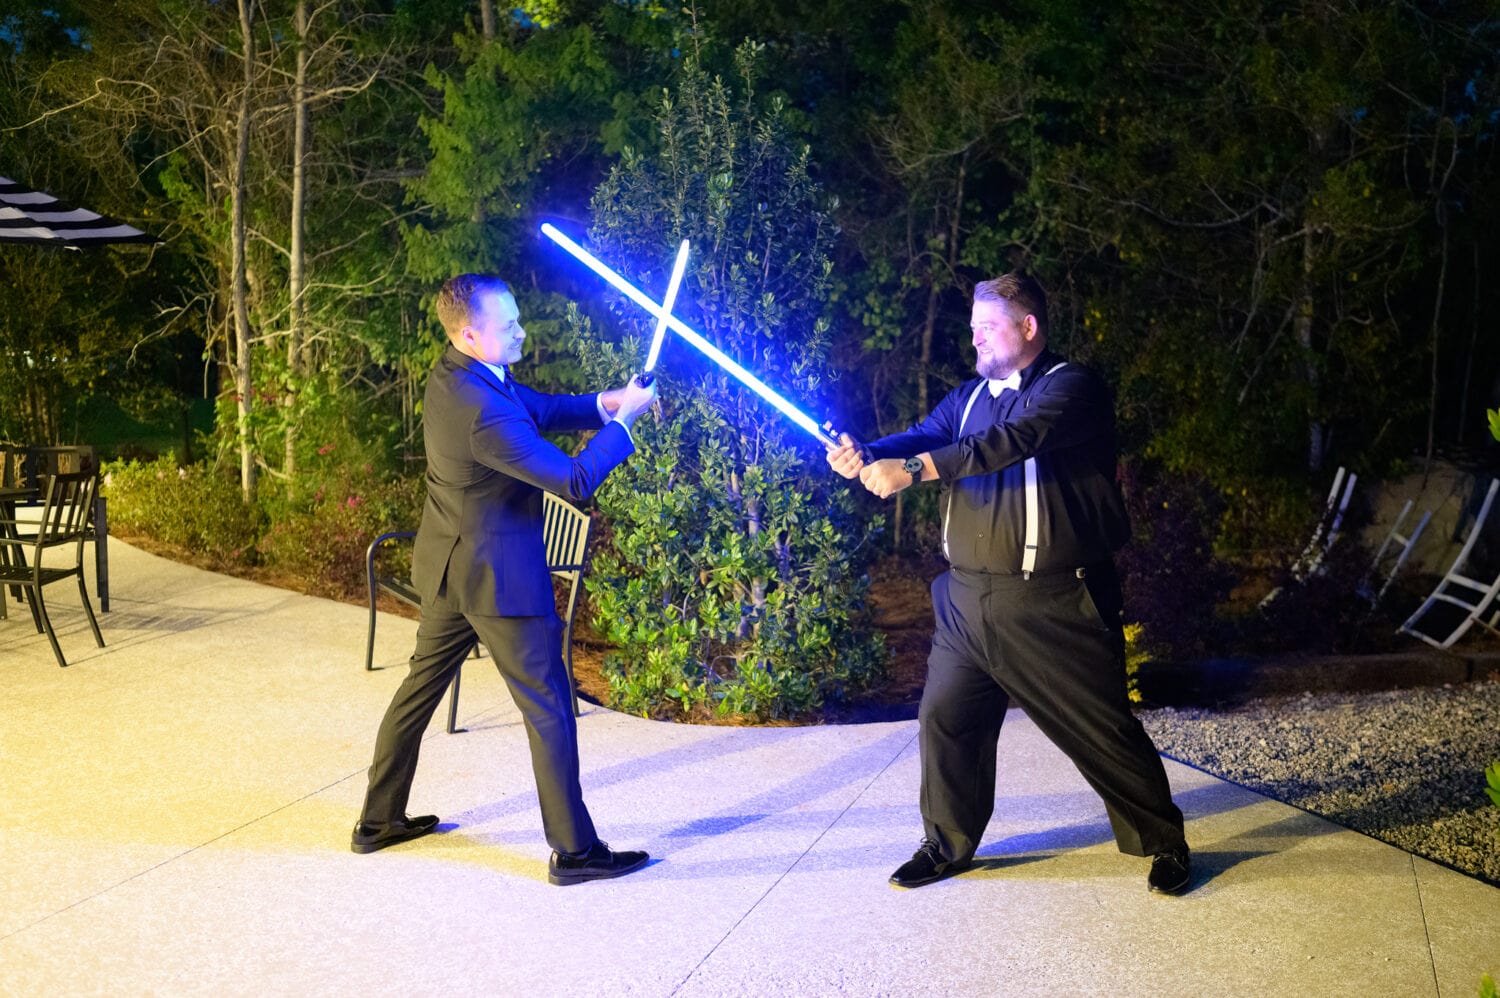 Groom and groomsmen having fun with lightsabers  - The Venue at White Oaks Farm